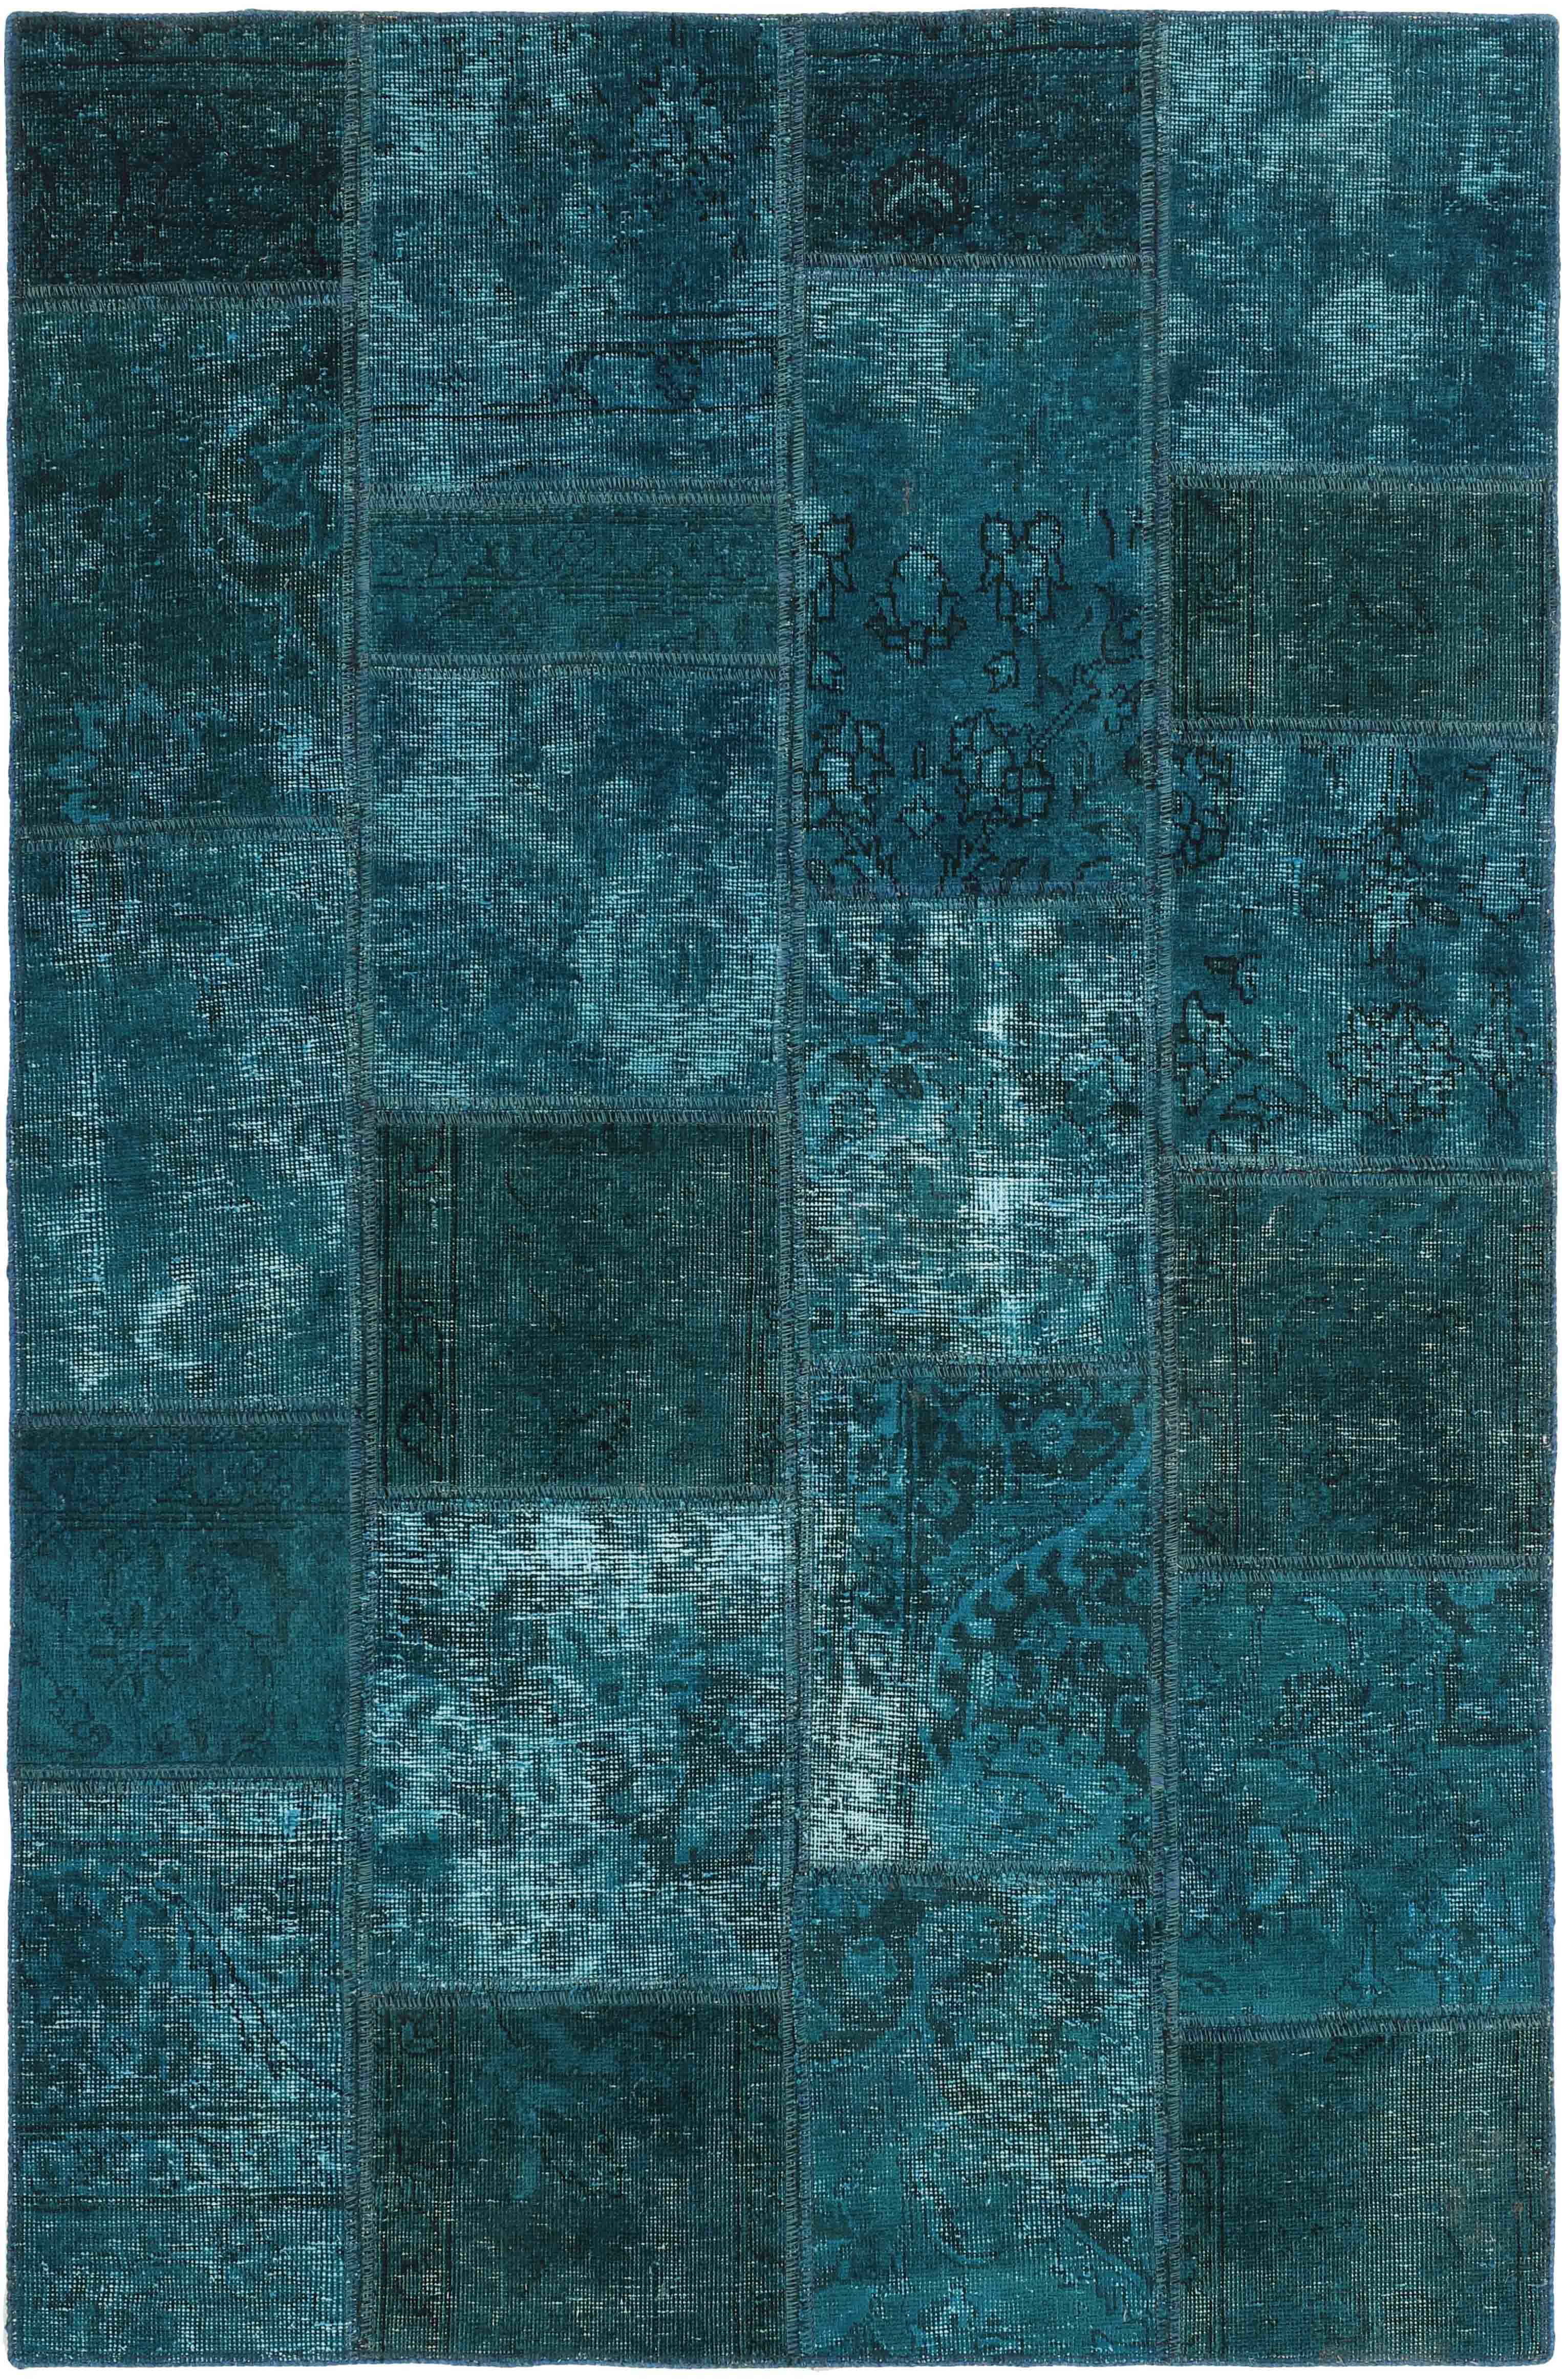 Authentic blue patchwork persian rug